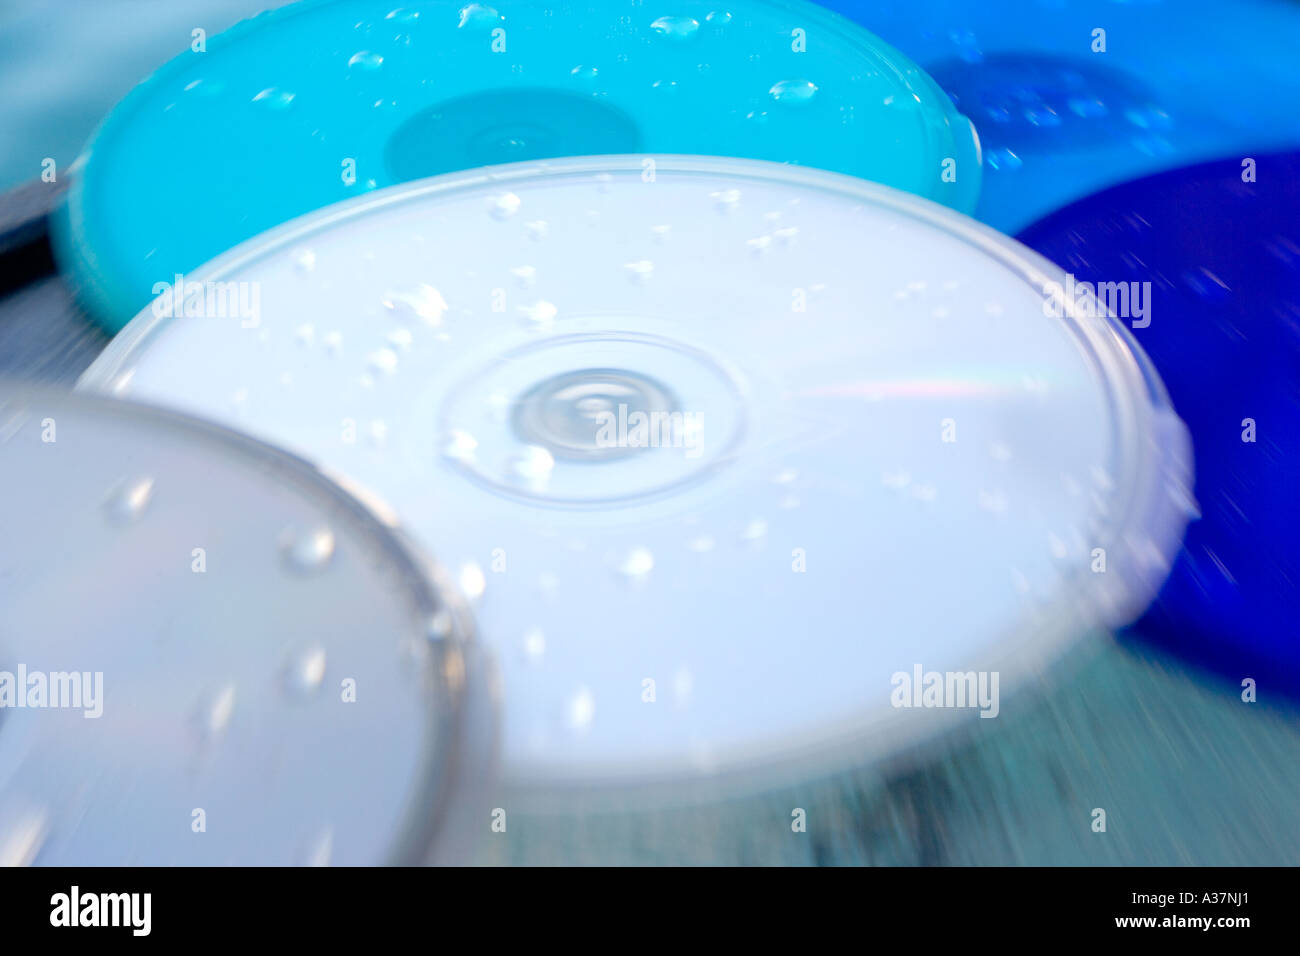 CD DVD containers PODZ product beside pool splashed with water Stock Photo